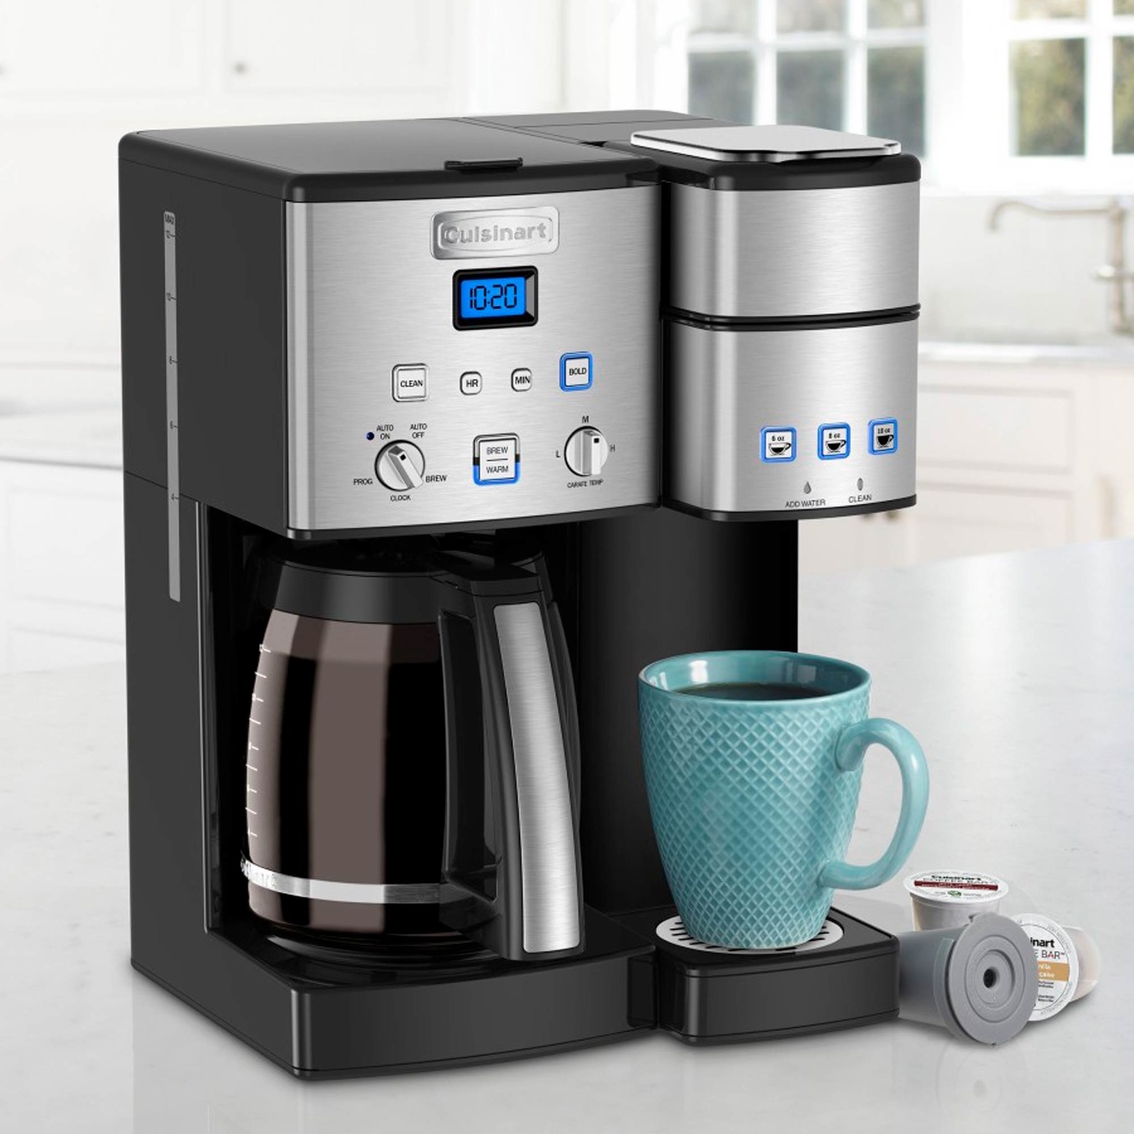 Cuisinart Coffee Center 12 Cup Coffeemaker and Single-Serve Brewer - Image 5 of 6